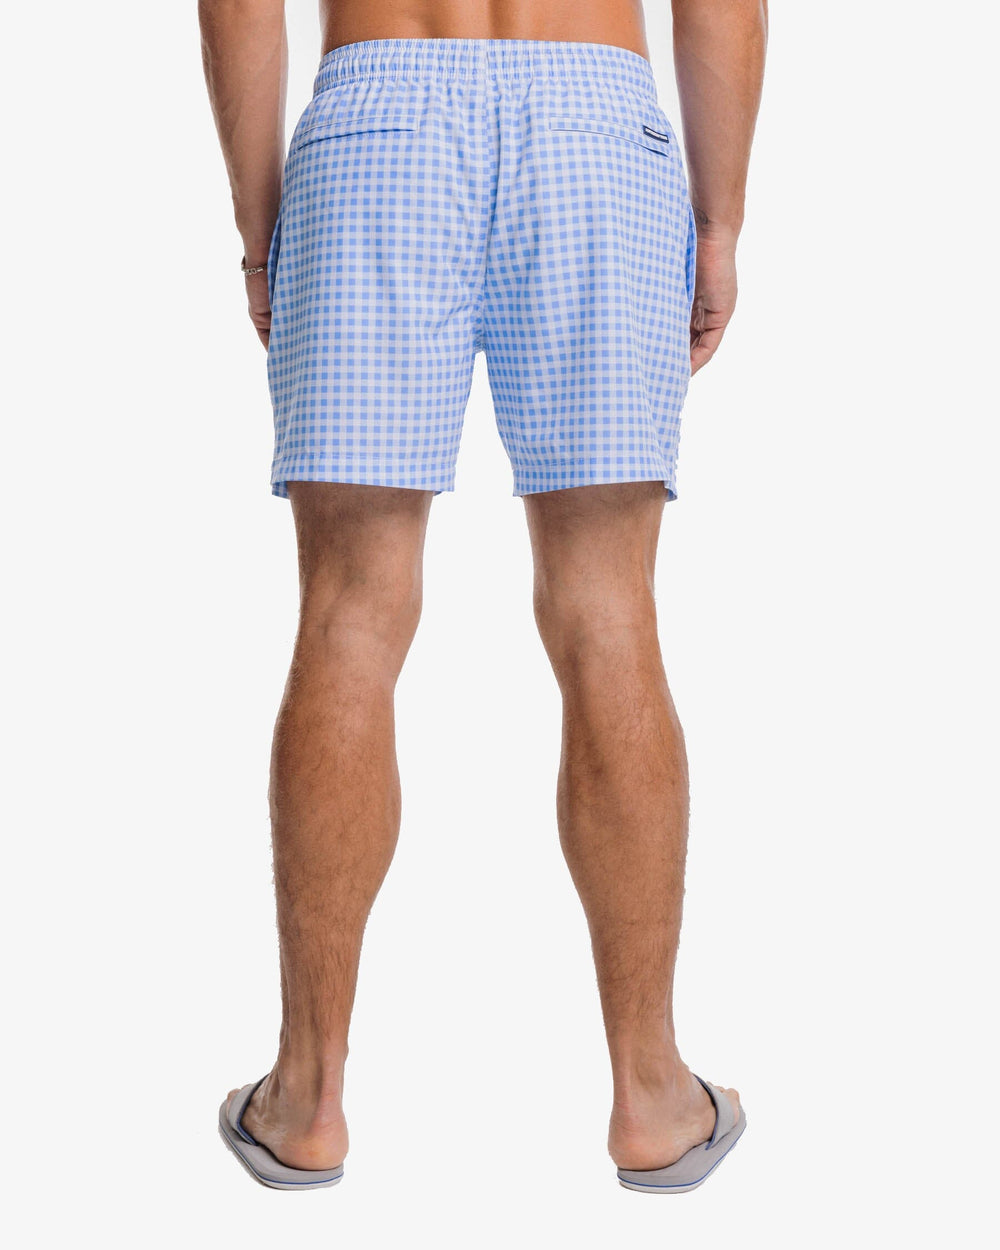 The back view of the Southern Tide Baldwin Gingham Printed Swim Trunk by Southern Tide - Ocean Channel